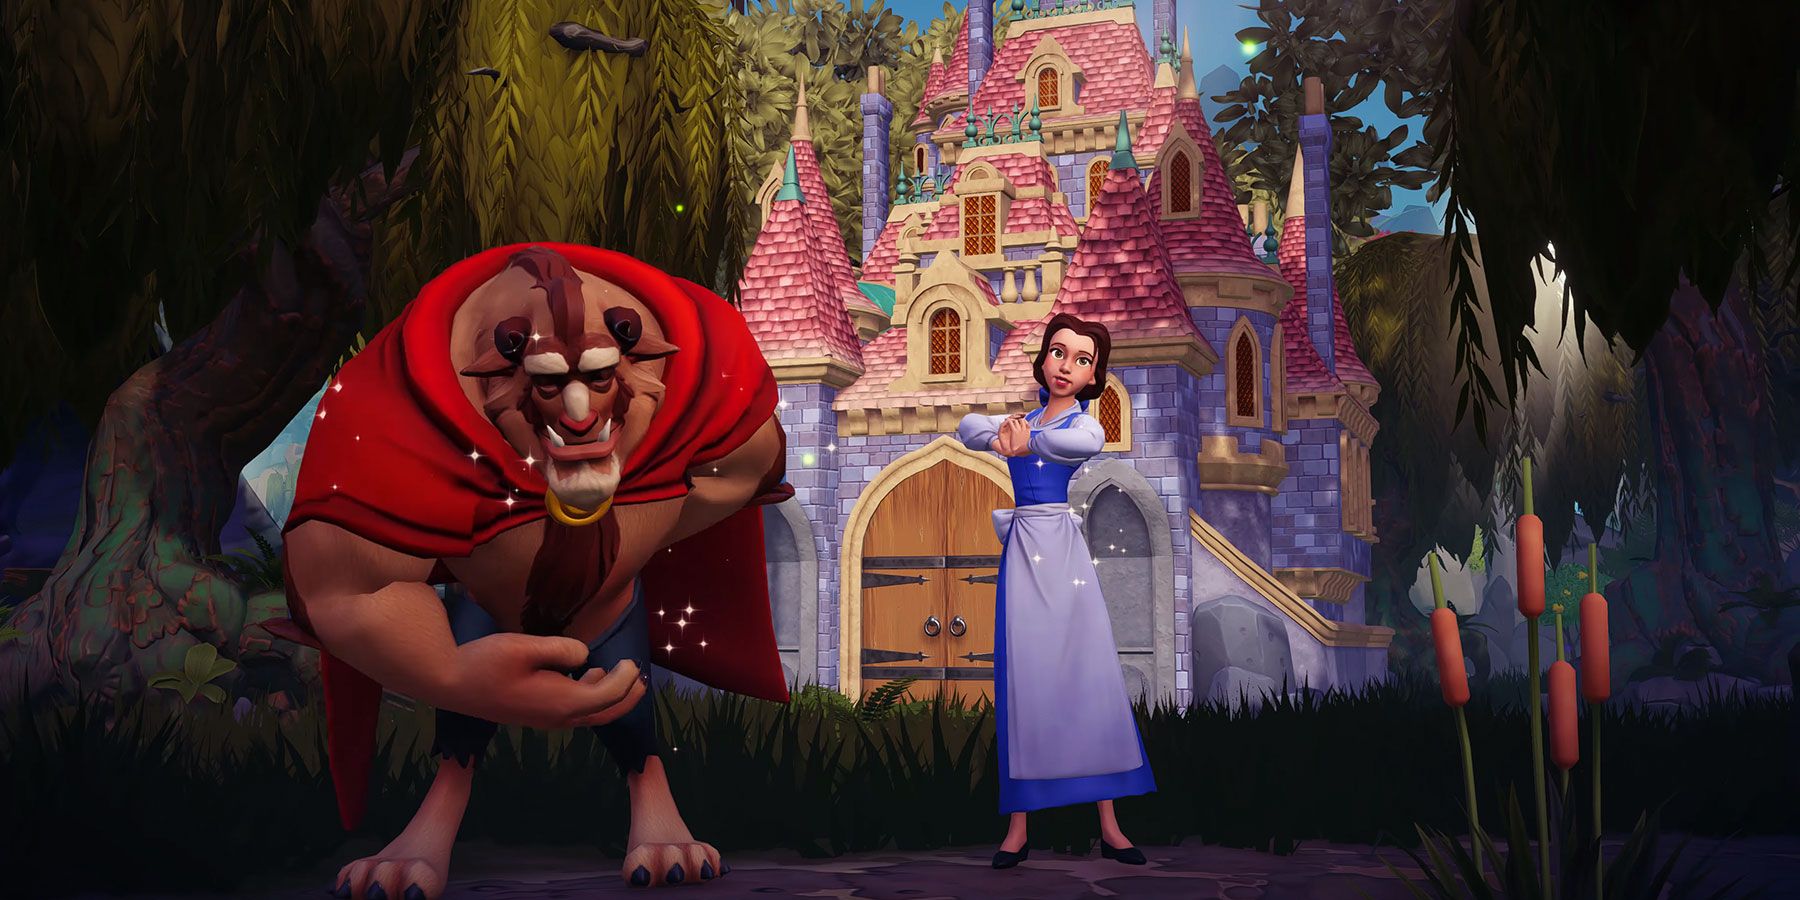 Belle and The Beast in Disney Dreamlight Valley.